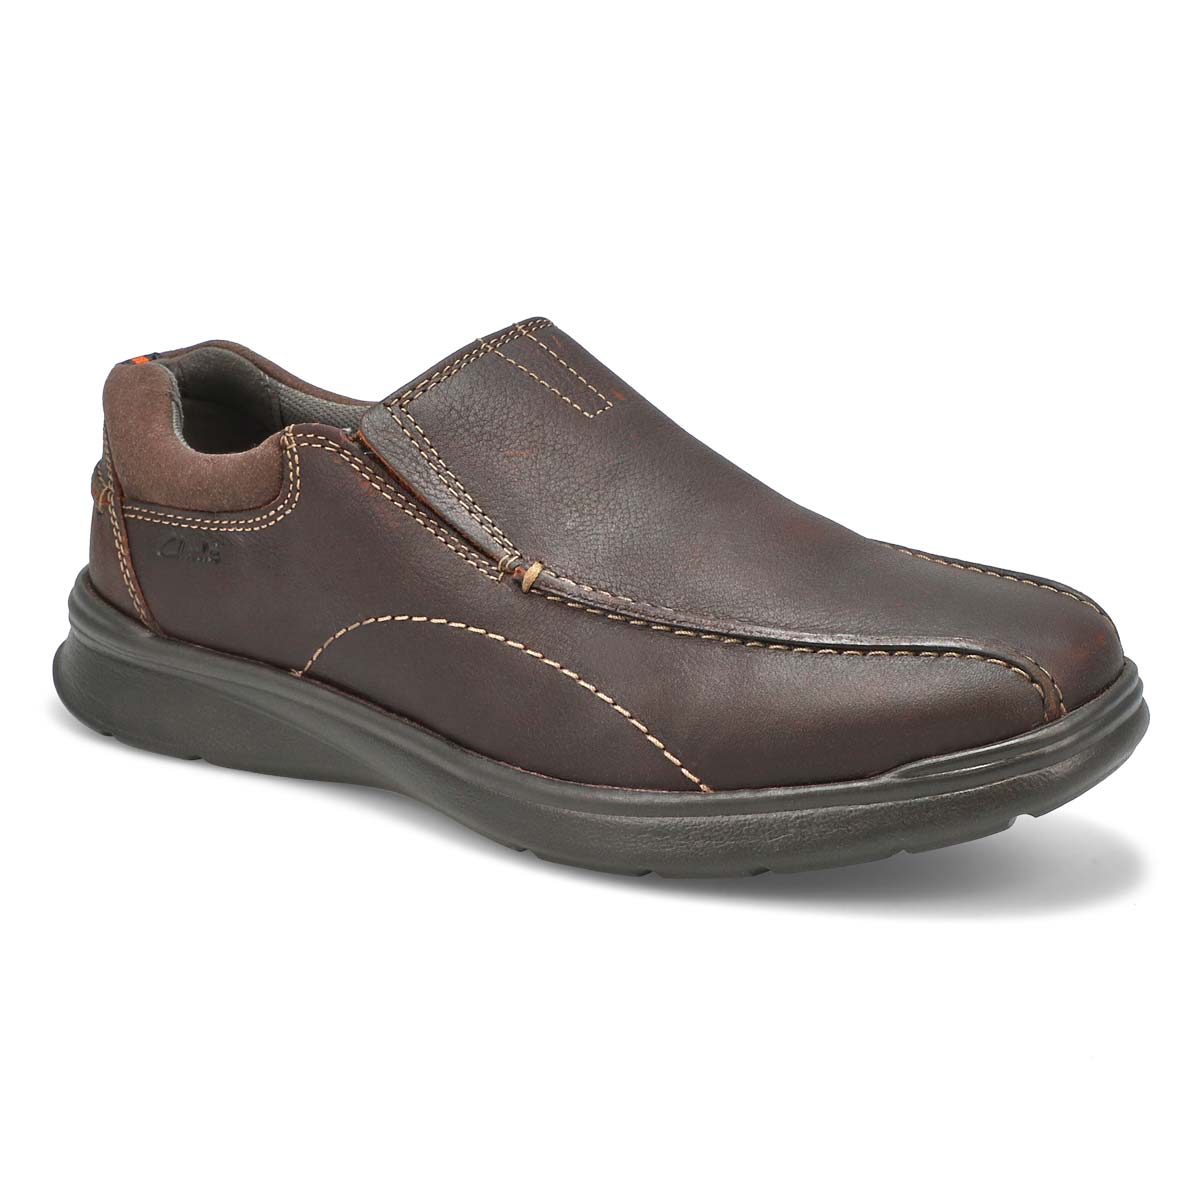 clarks men's cotrell top leather chukka boots